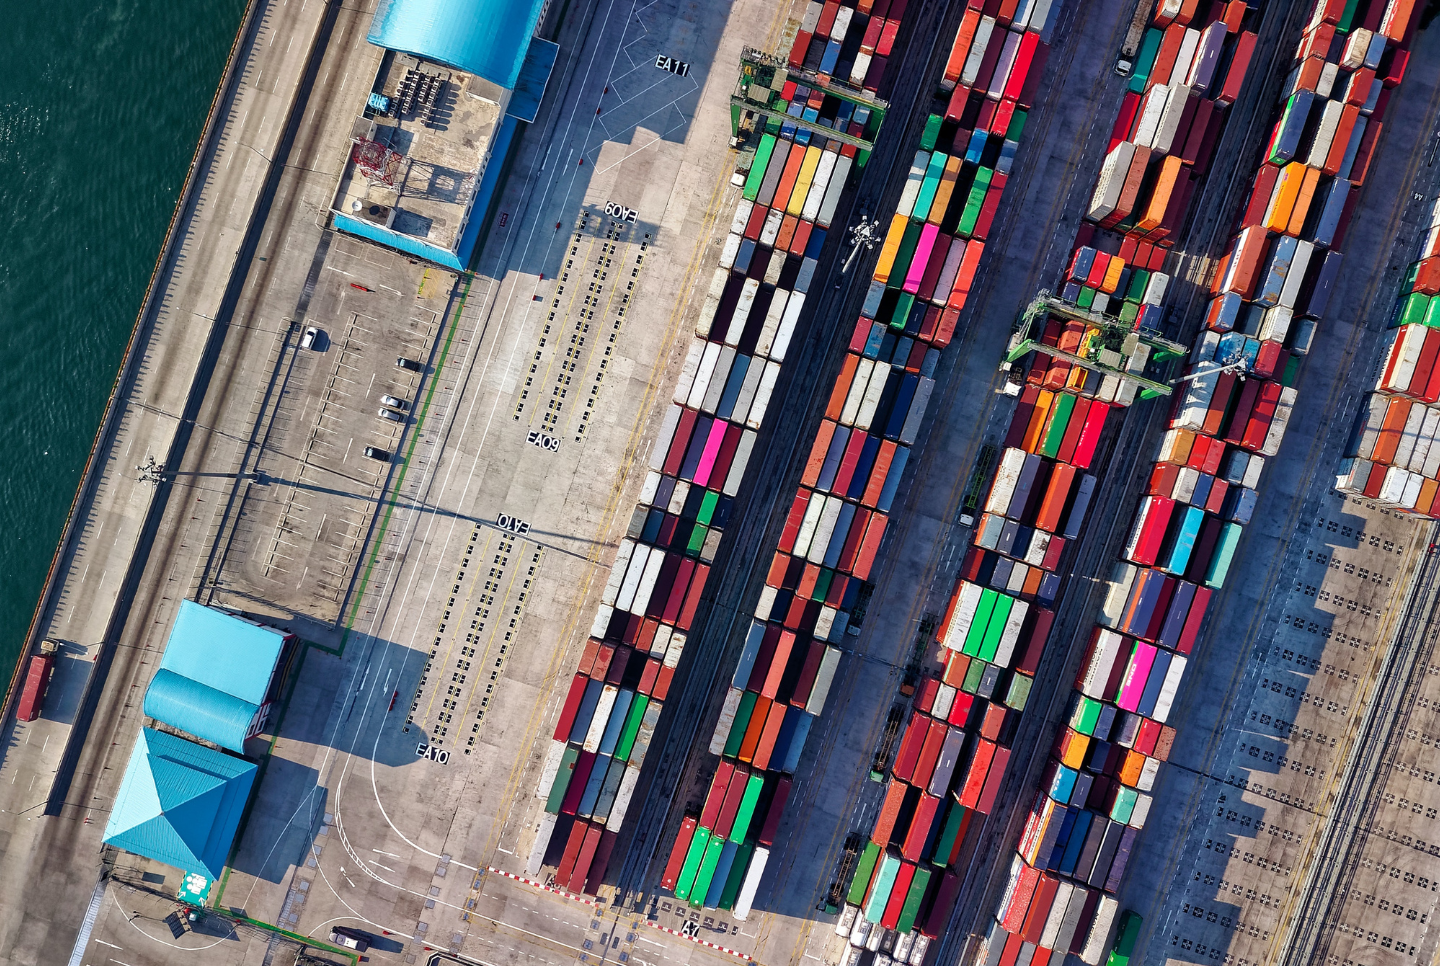  five of the most prominent trends in the supply chain and logistics industry to keep in mind for 2022.